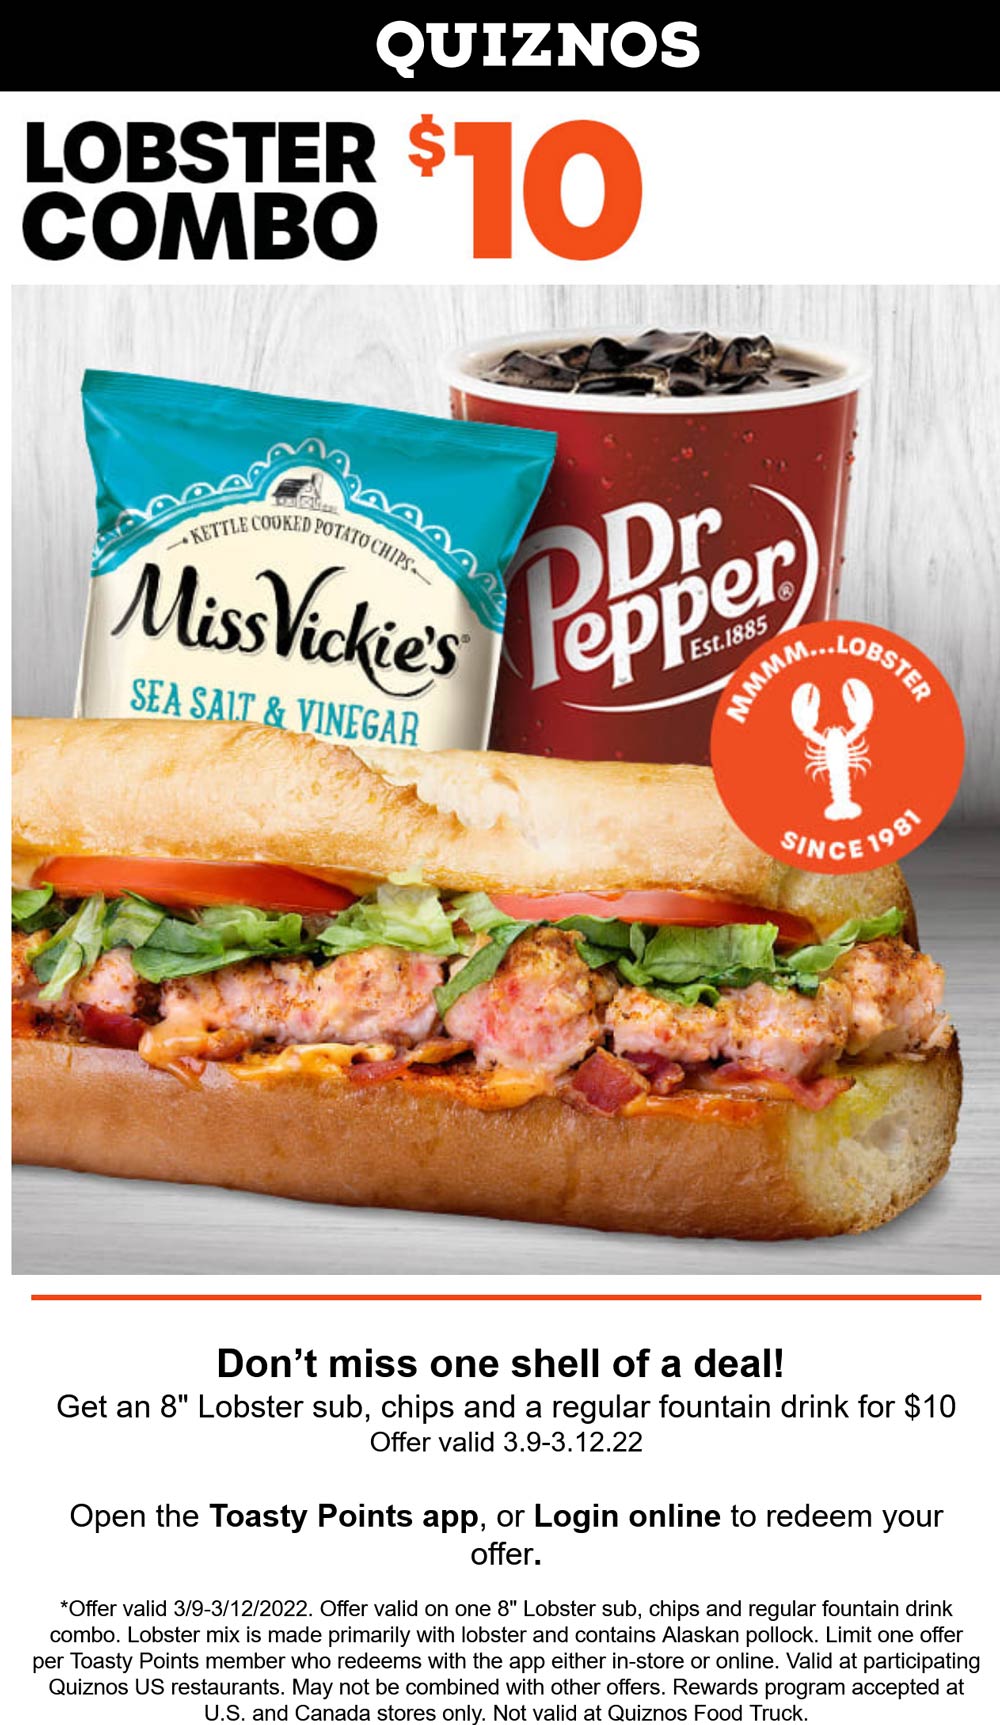 Quiznos restaurants Coupon  Lobster sandwich + chips + drink = $10 at Quiznos #quiznos 